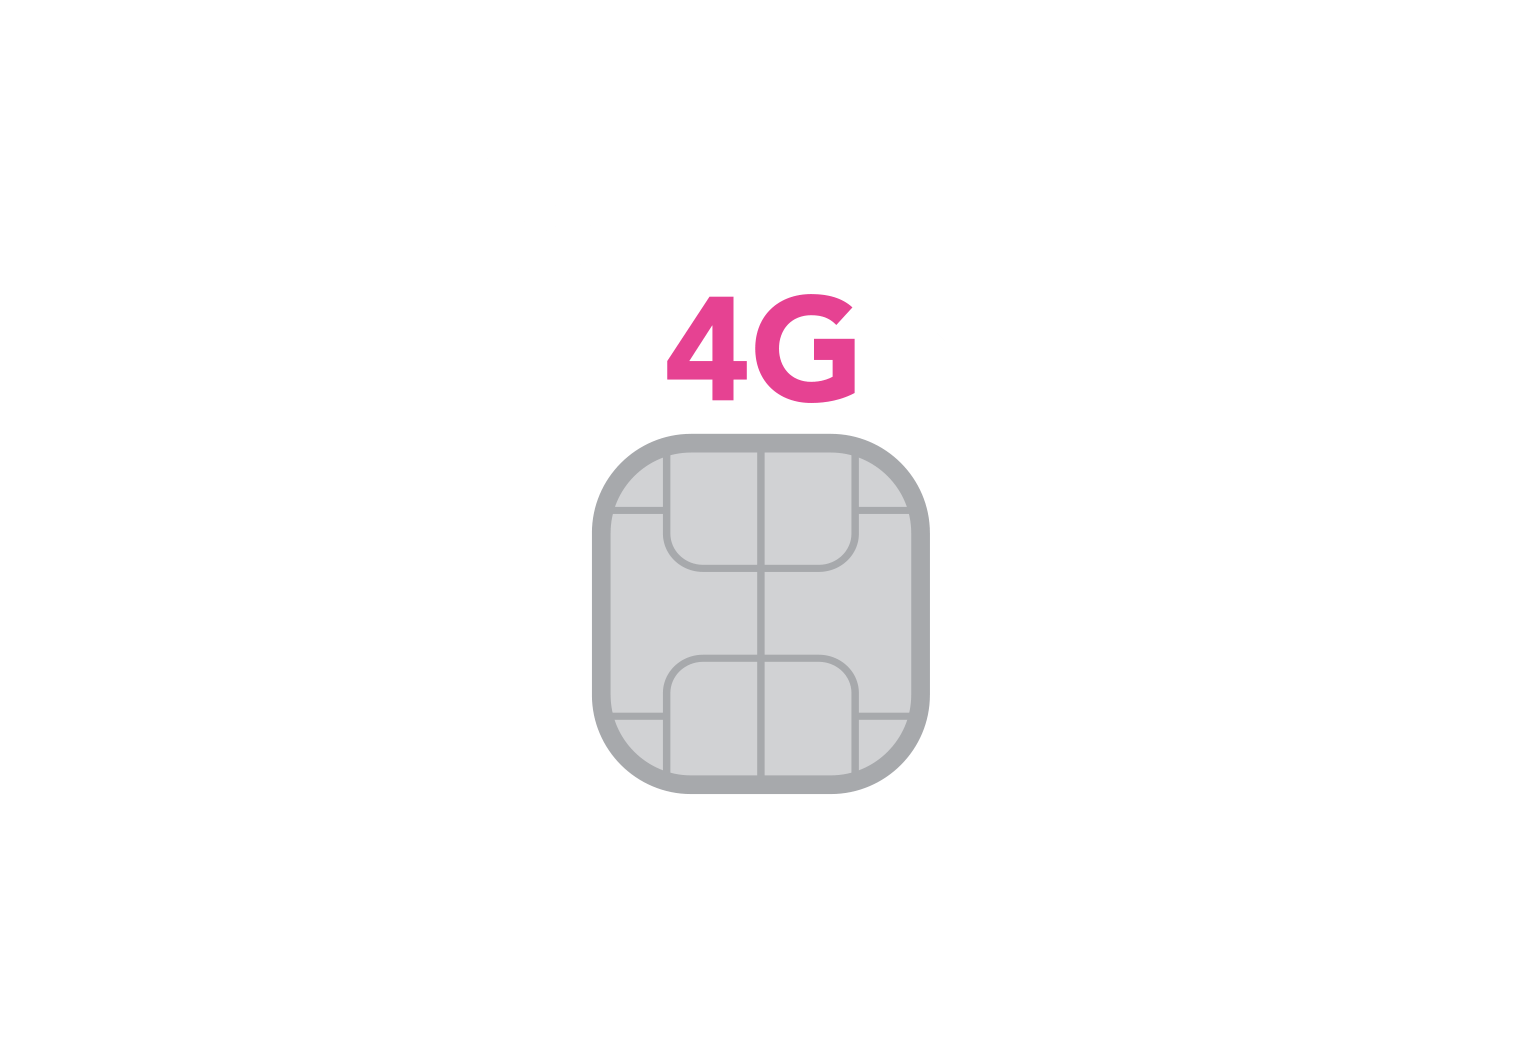 How to Set Up a 4G LTE Antenna for Best Performance